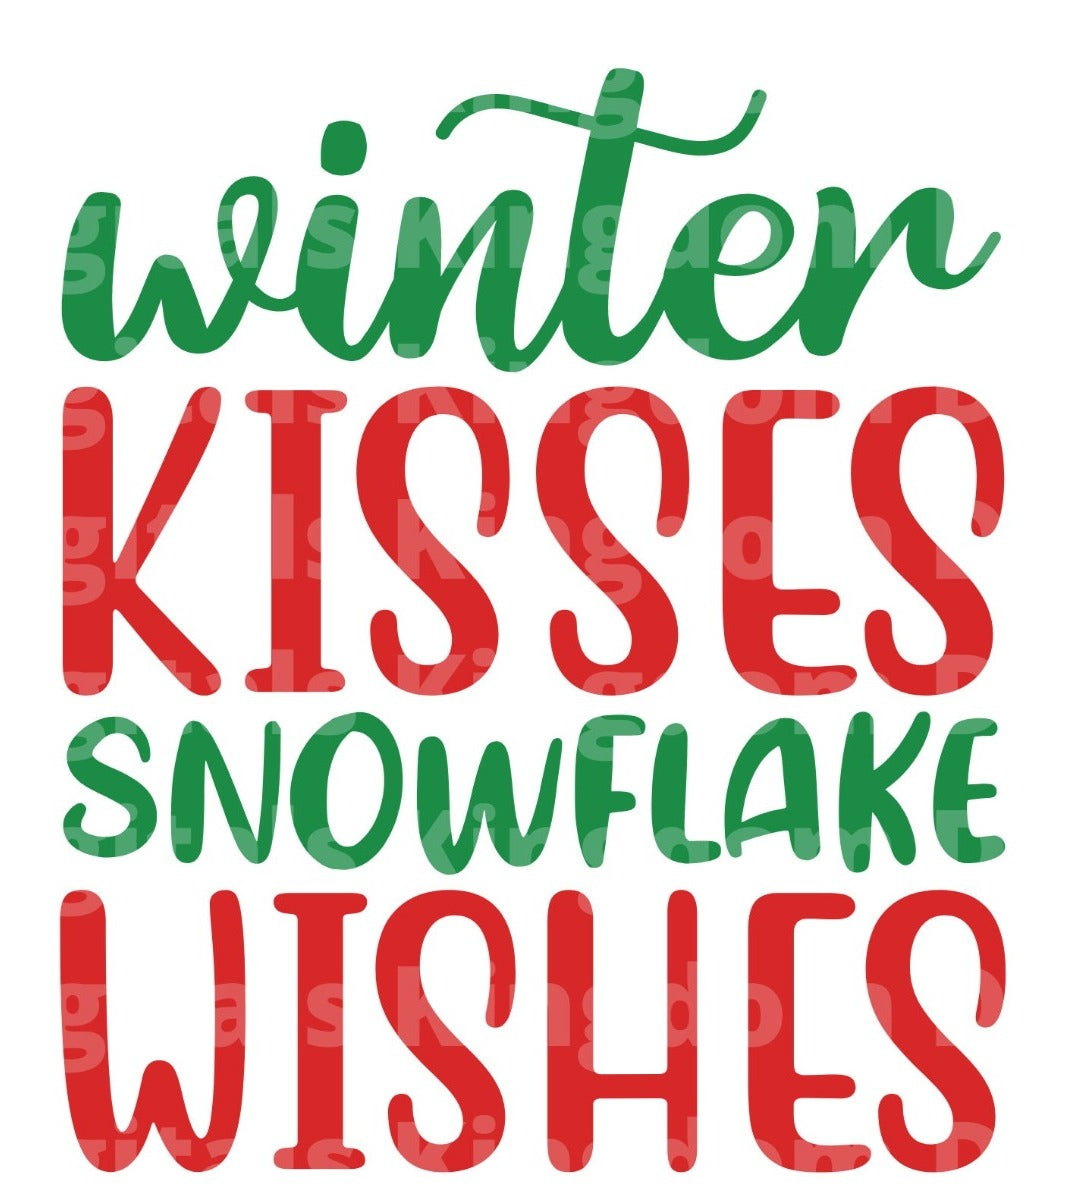 Winter kisses snowflake wishes SVG Cut File